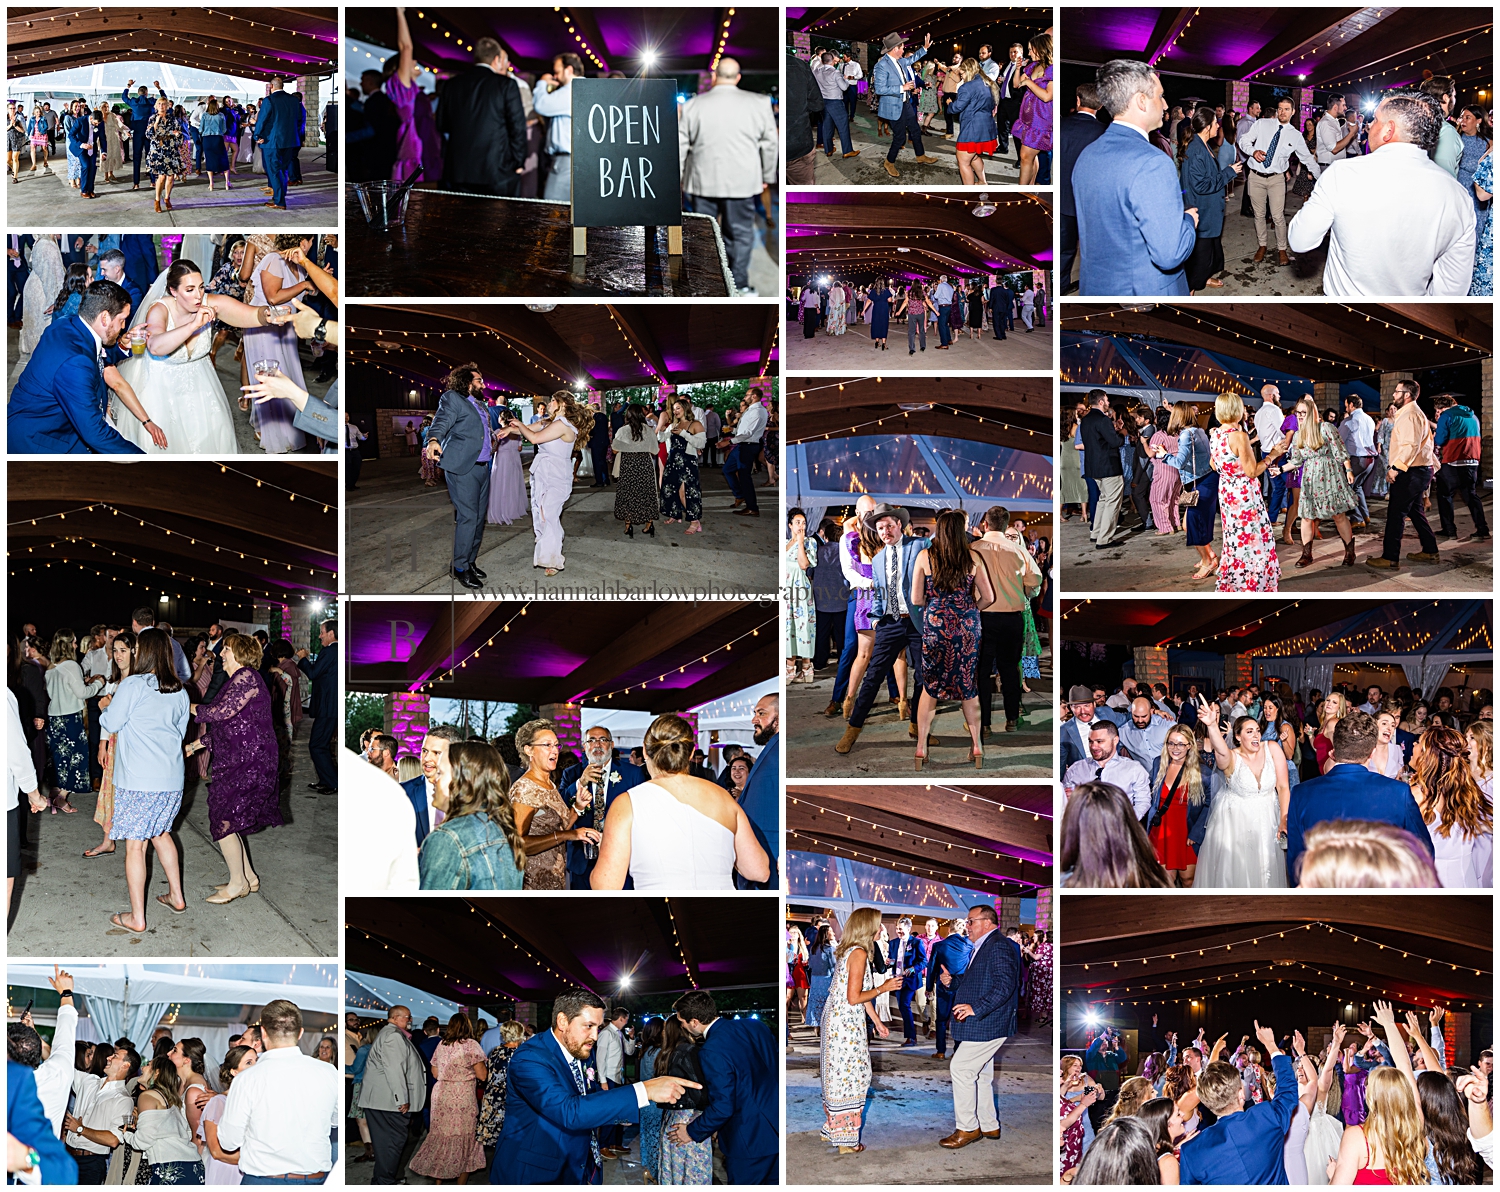 Outdoor wedding reception photos highlighted with packed dance floor and purple uplighting.